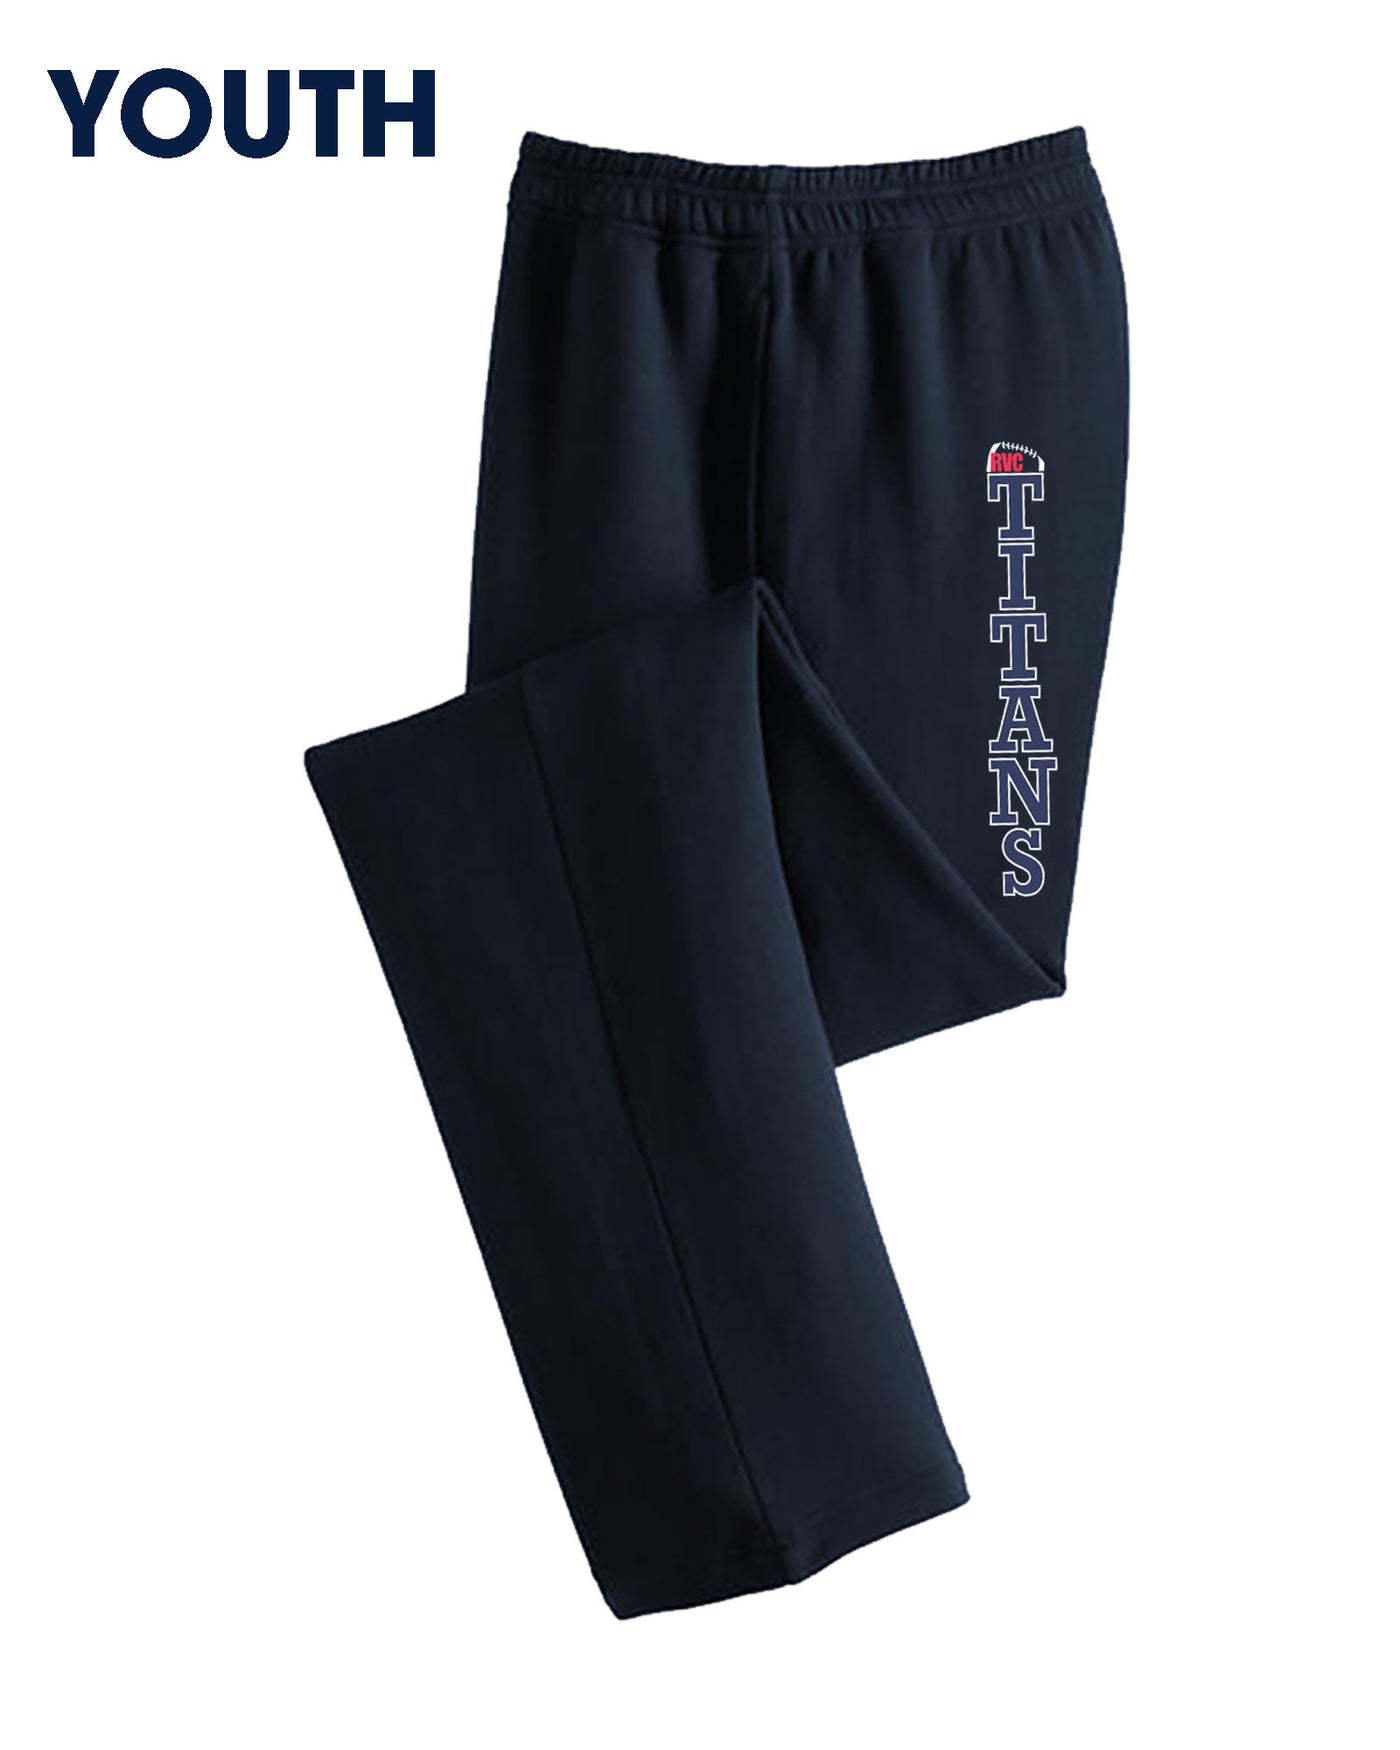 YOUTH Titans Open Bottom Sweat Pants